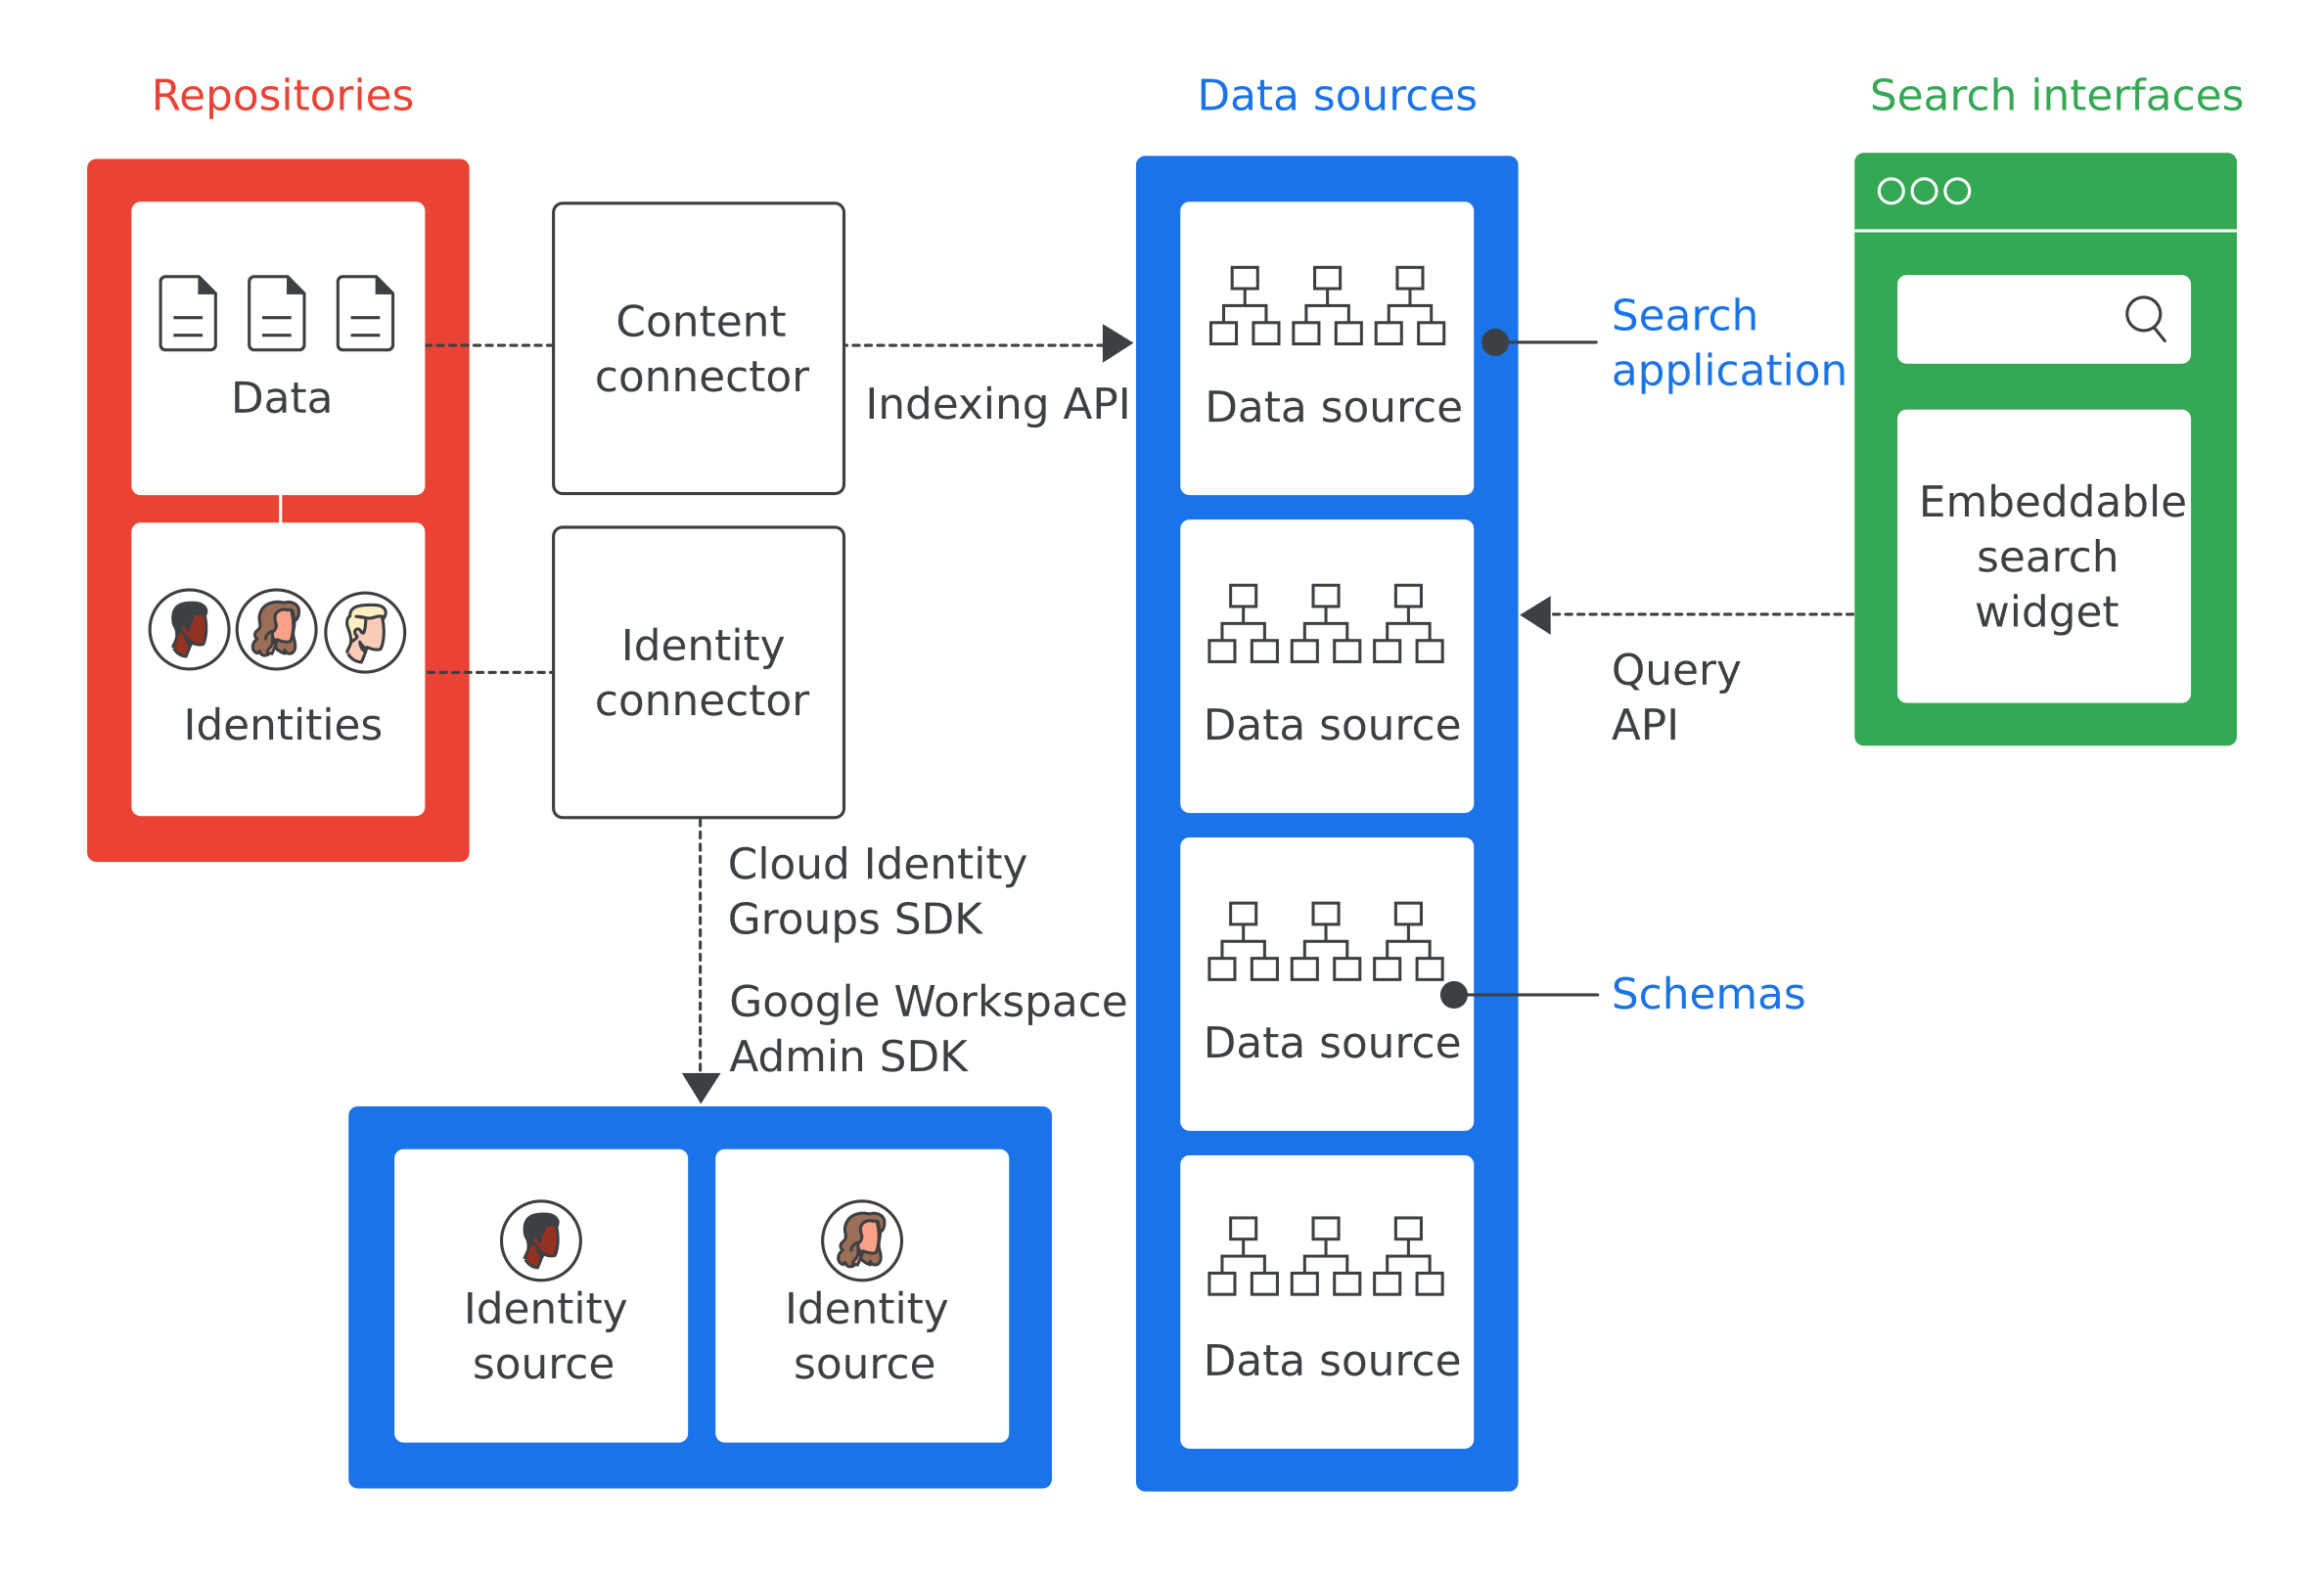 Overview of Google Cloud Search architecture